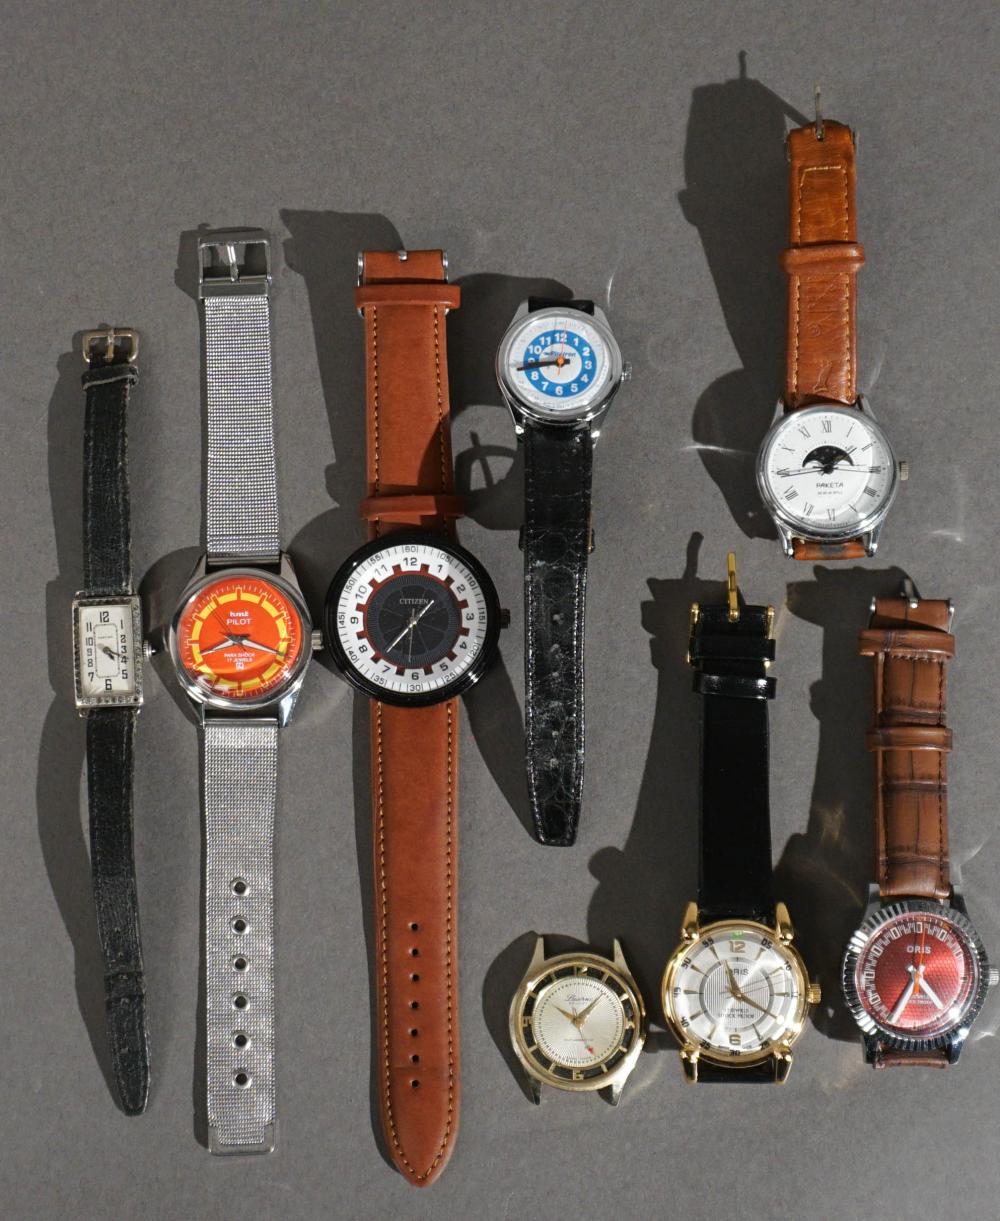 GROUP OF ASSORTED WRISTWATCHESGroup